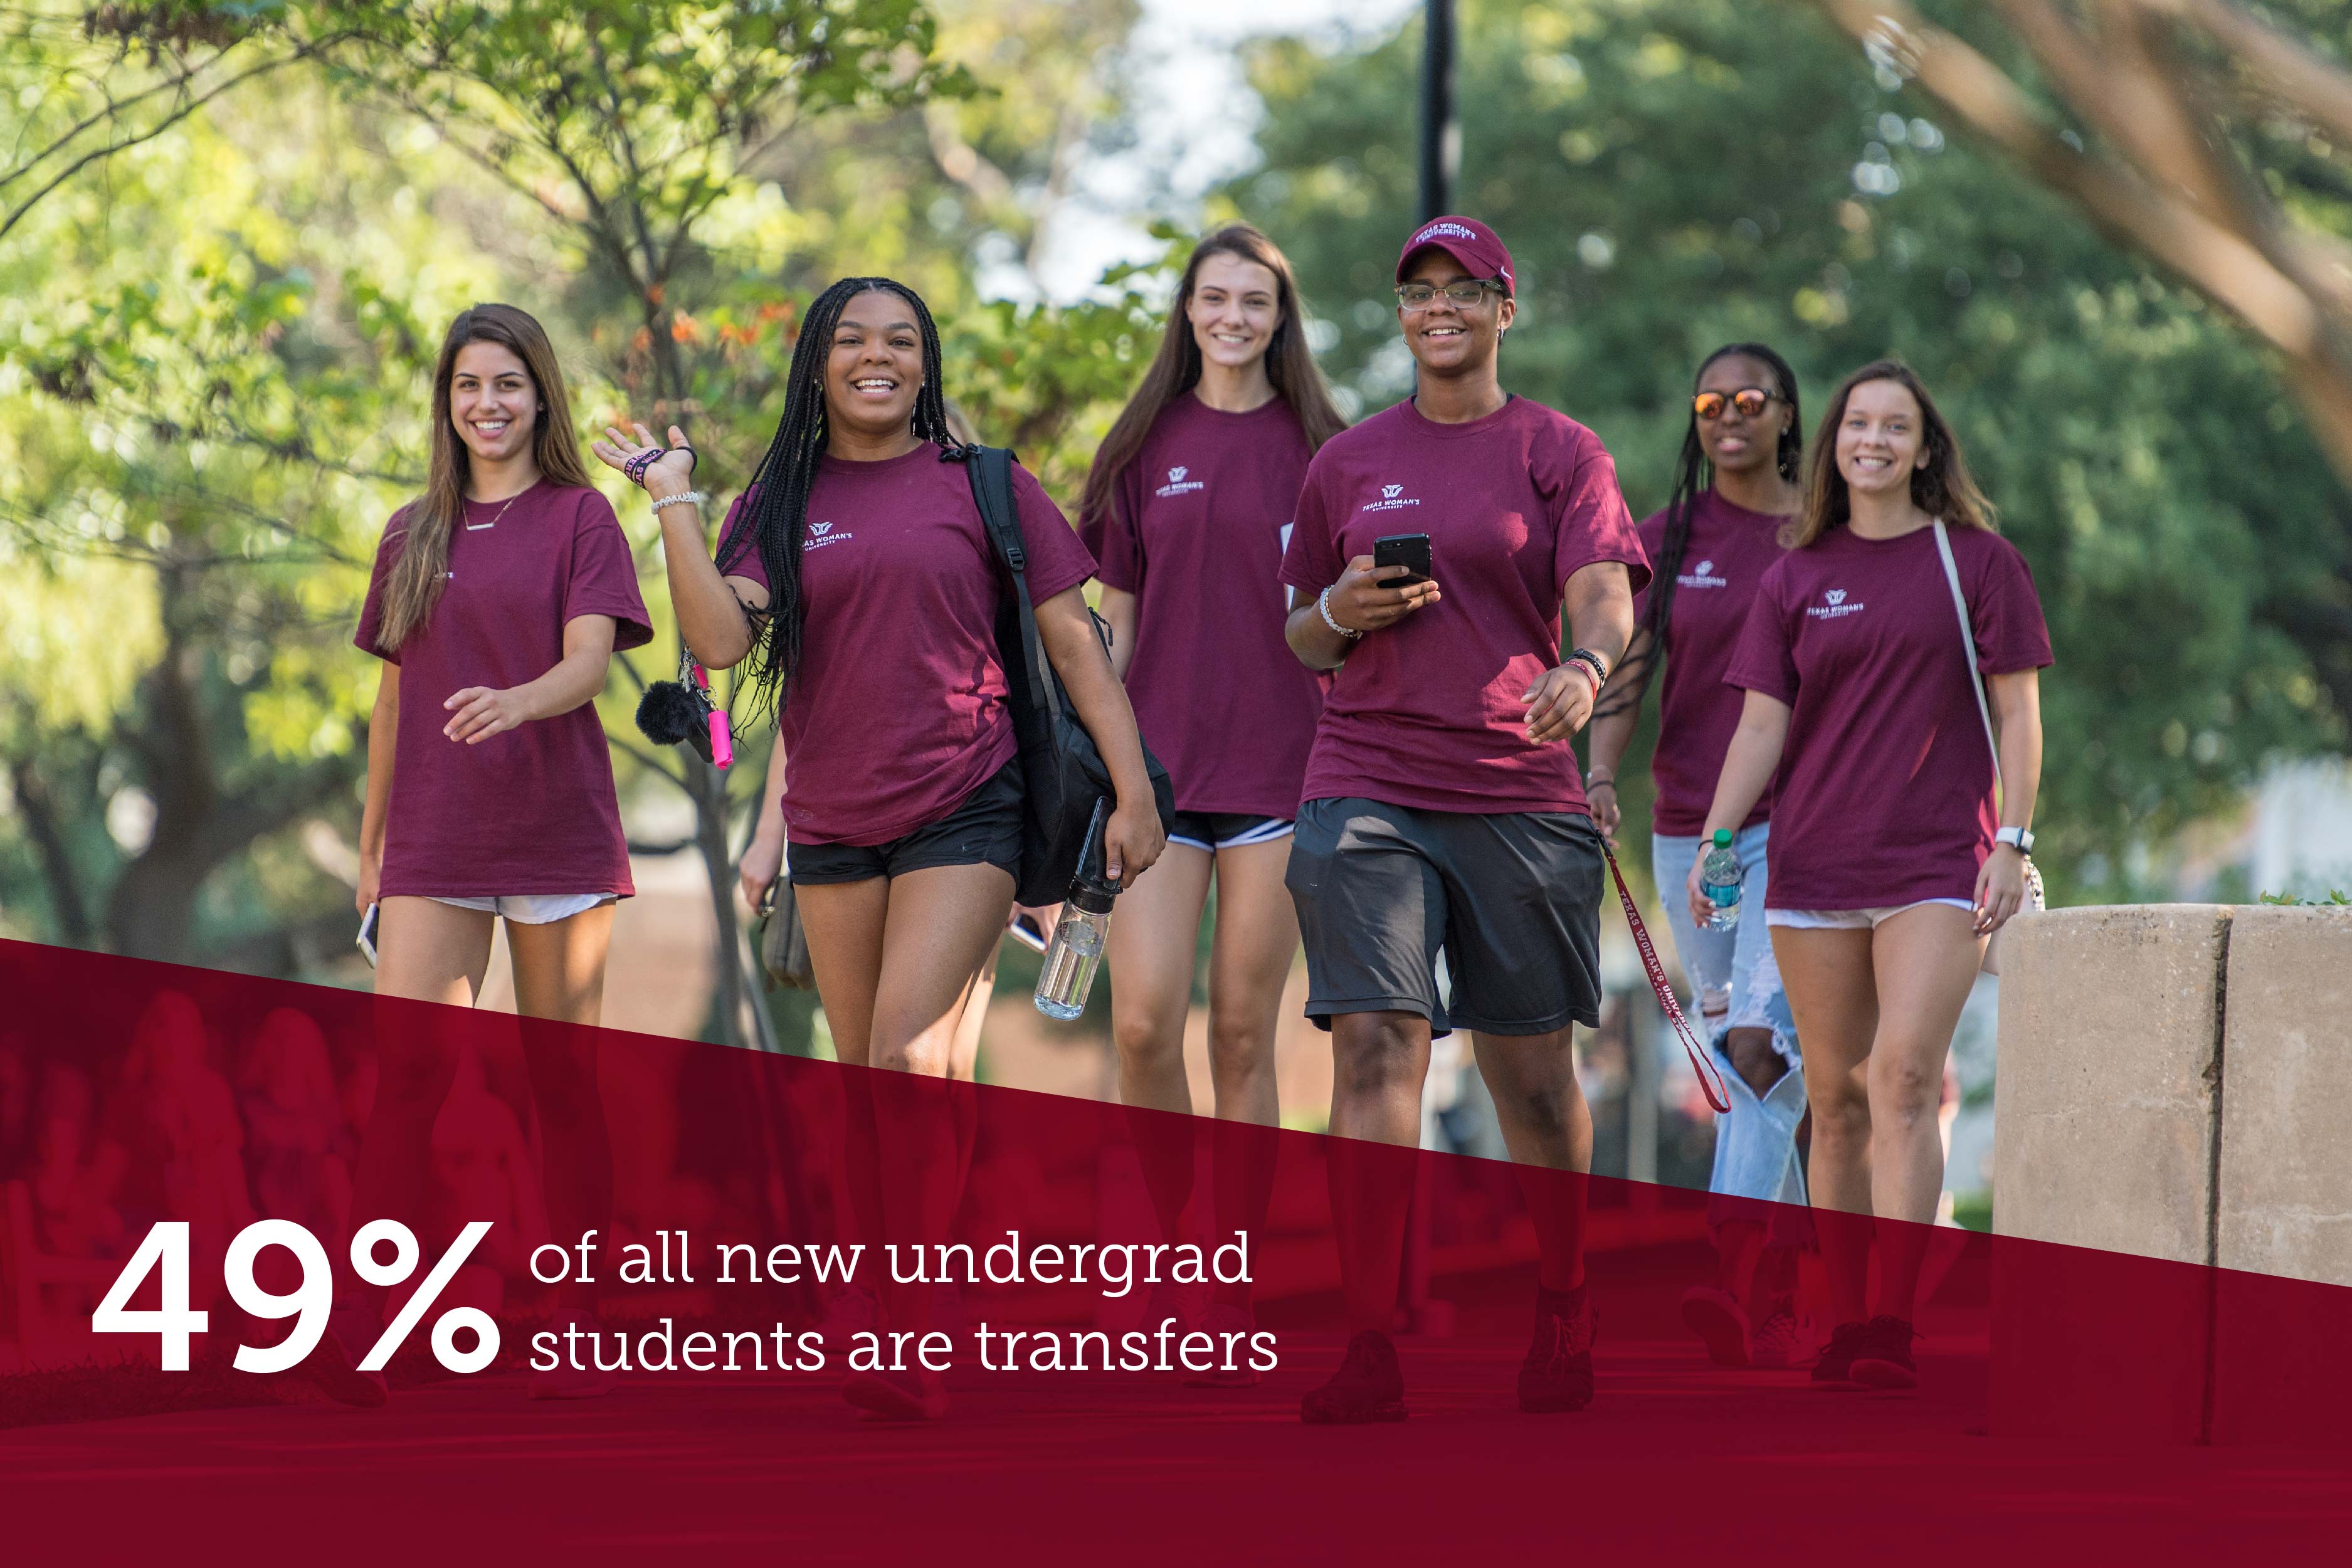 A group of TWU students walk across campus with the university fact "49% of all new undergrads are transfers" displayed below them.